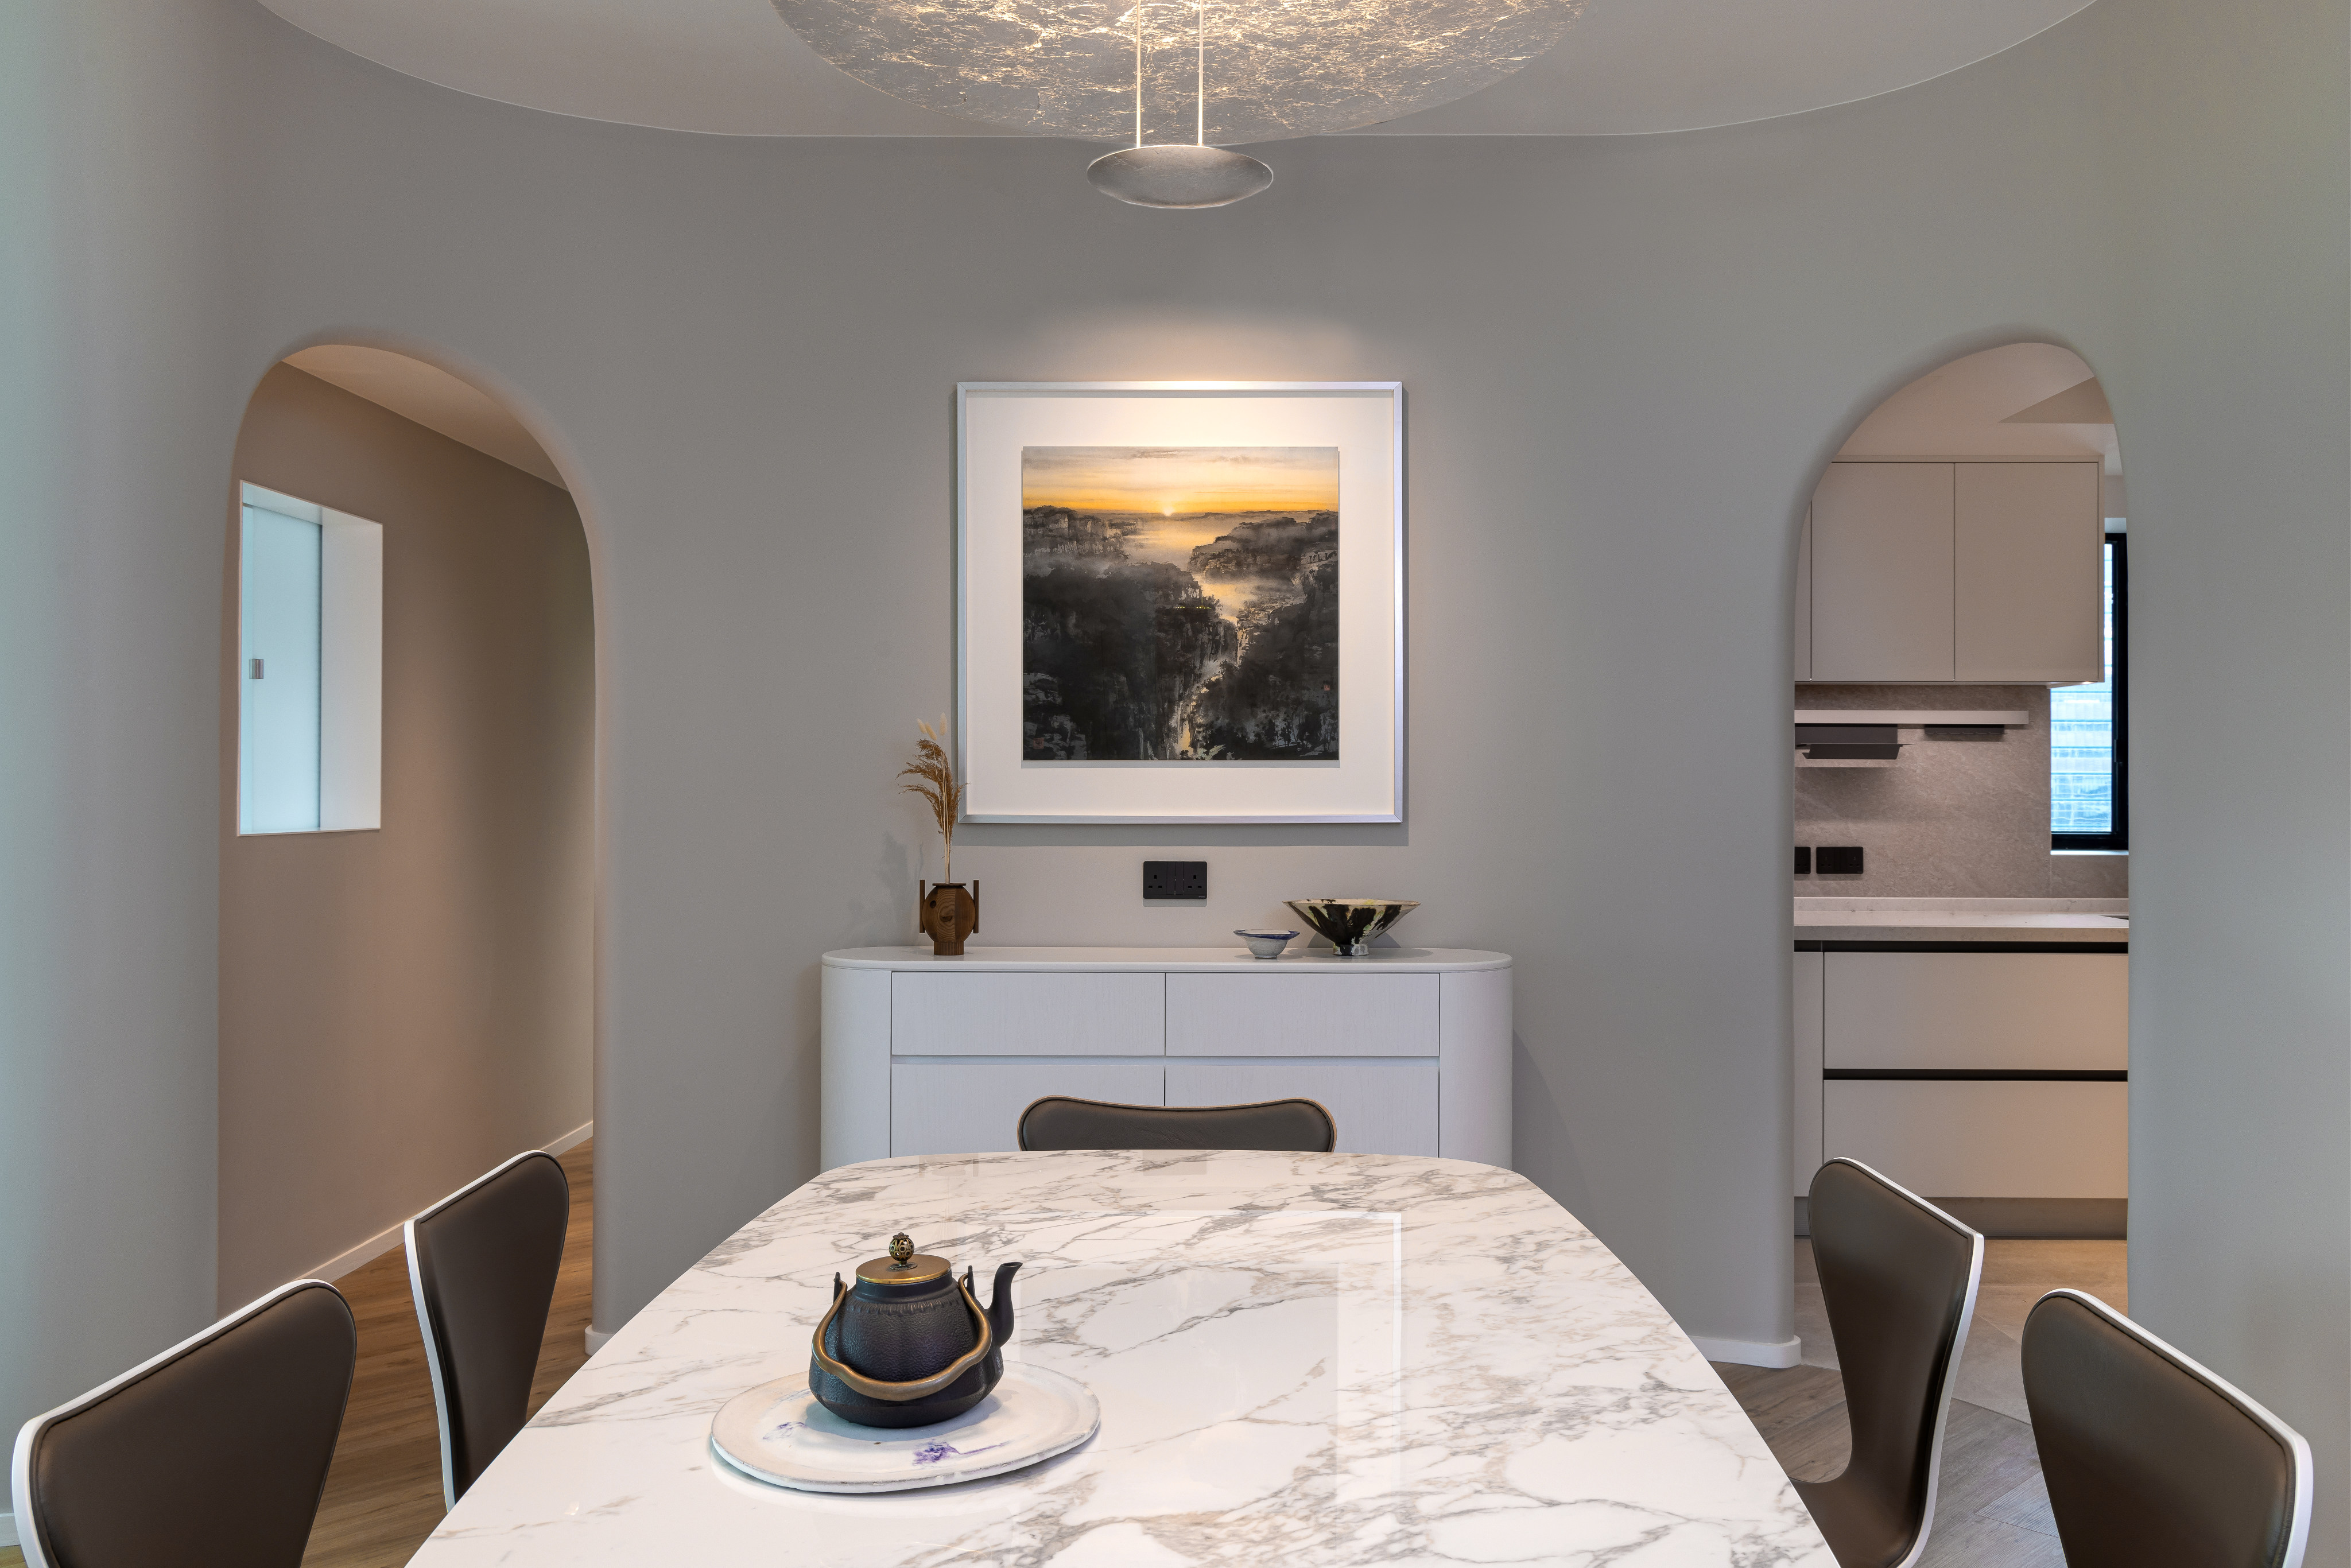 The meticulous renovation by Wesley Liu of a Happy Valley, Hong Kong flat saw awkward angles arced and an artistic homeowner’s needs met to create an elegant, soft-edged home. Photo: Wesley Liu and Dick Liu